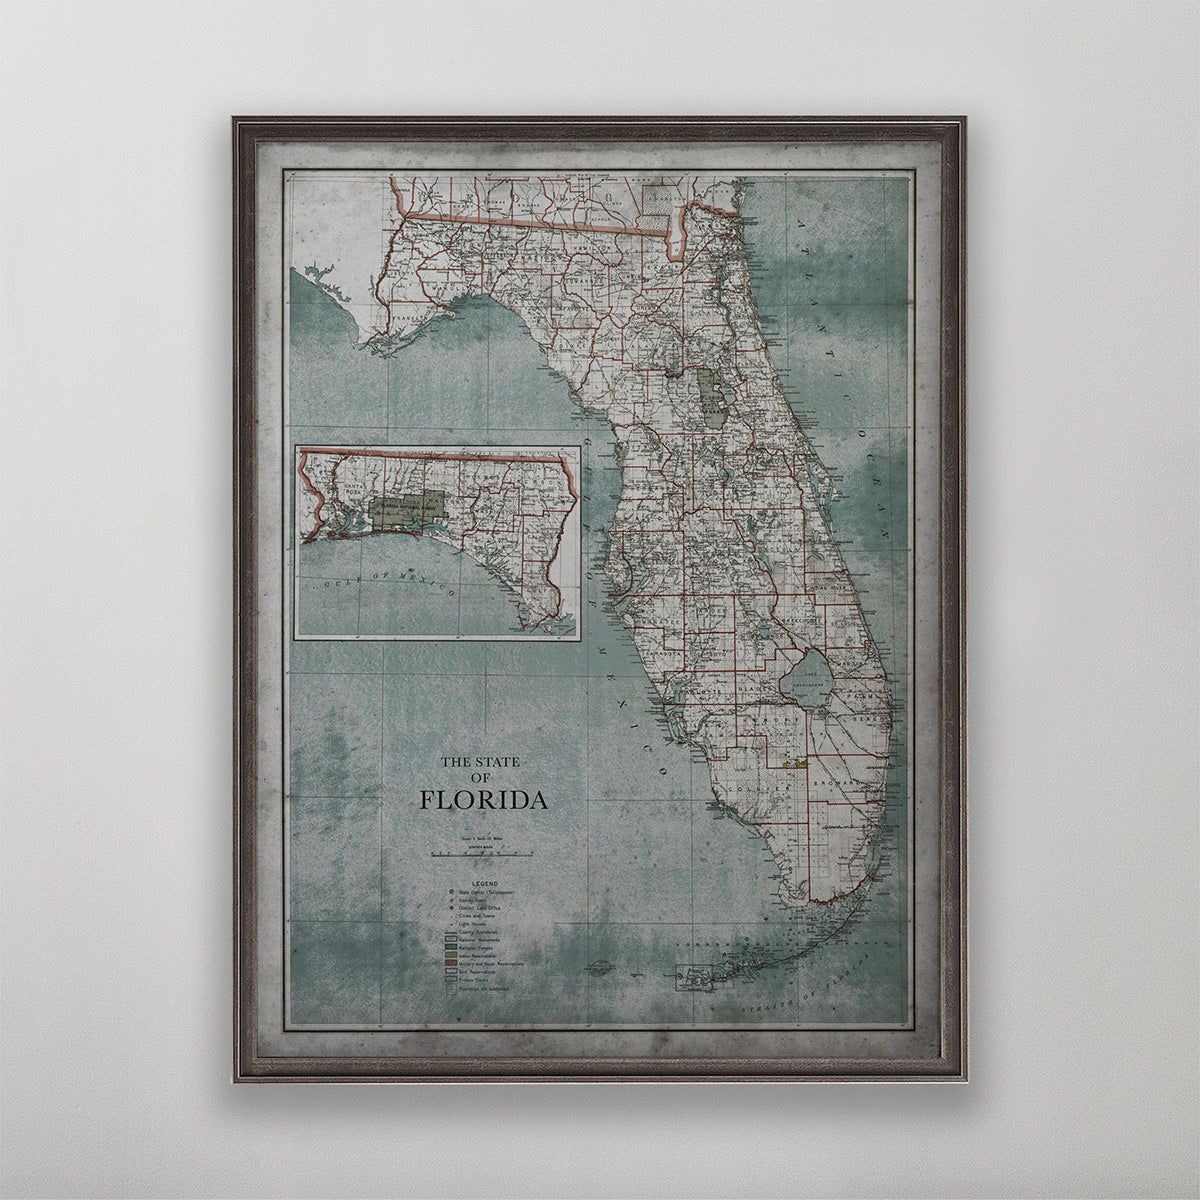 Old vintage historic weathered map of Florida for wall art home decor. 